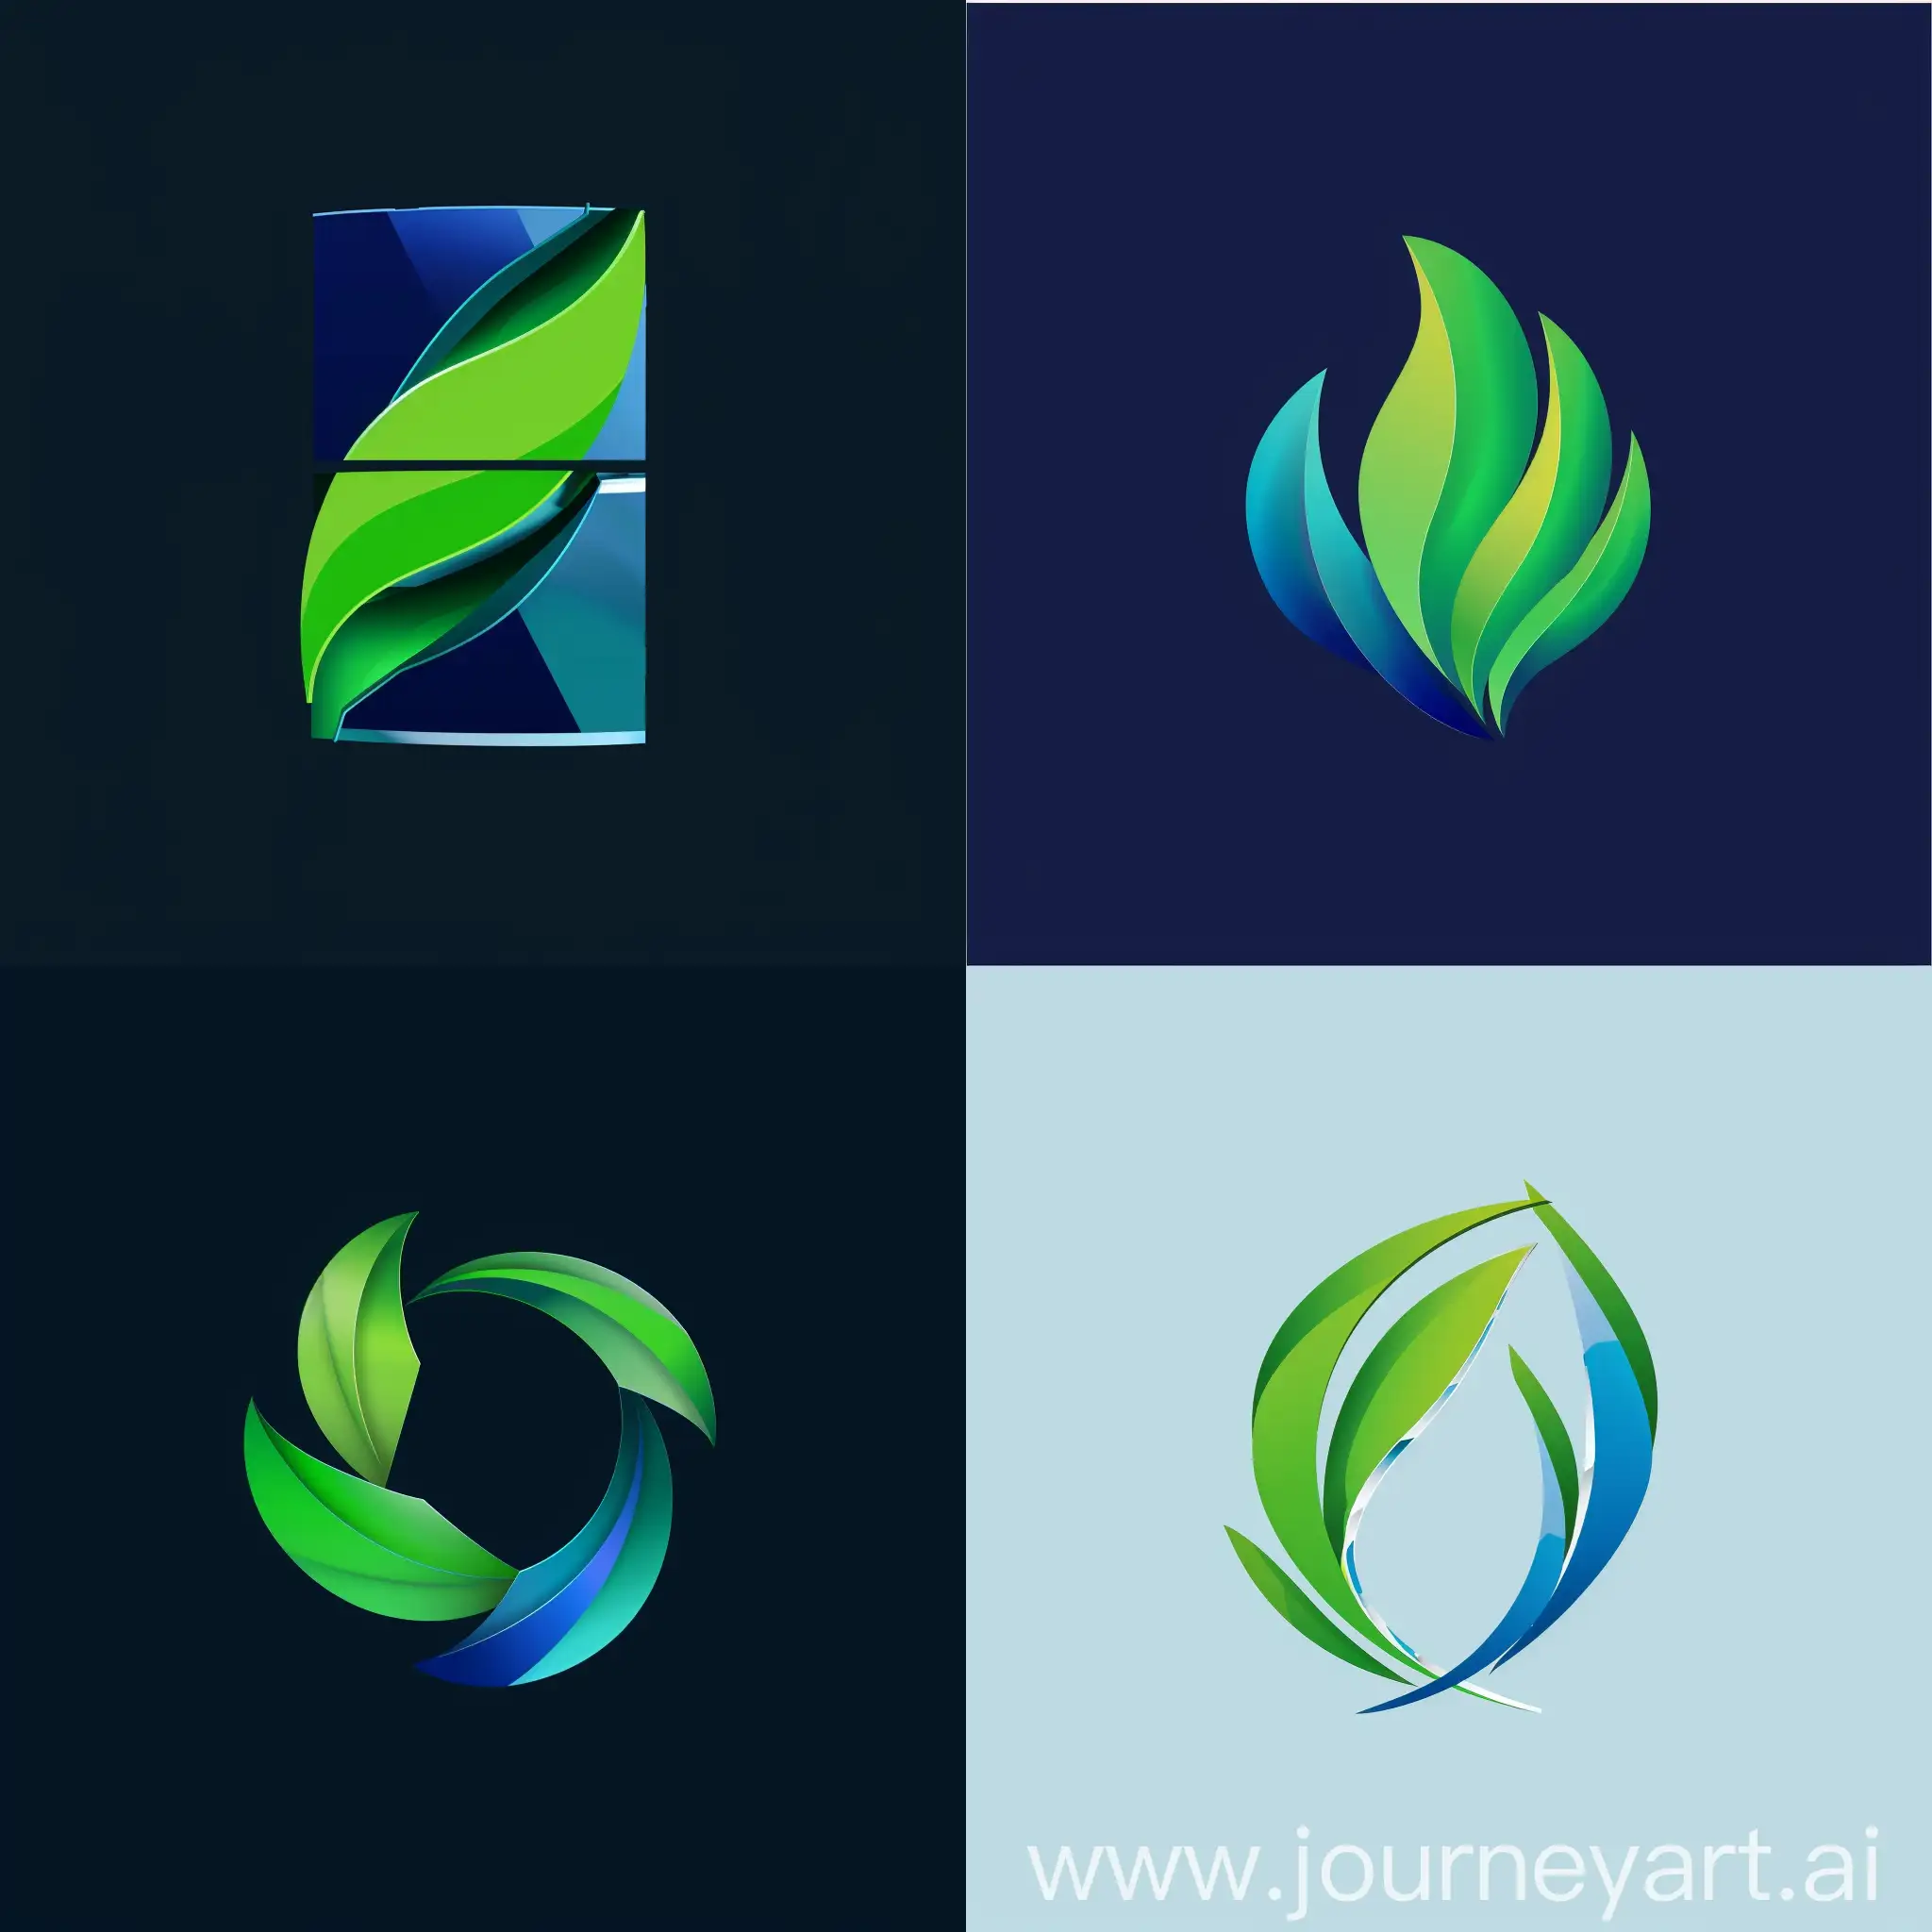 Modern-Appliance-Company-Logos-with-Green-and-Blue-Colors